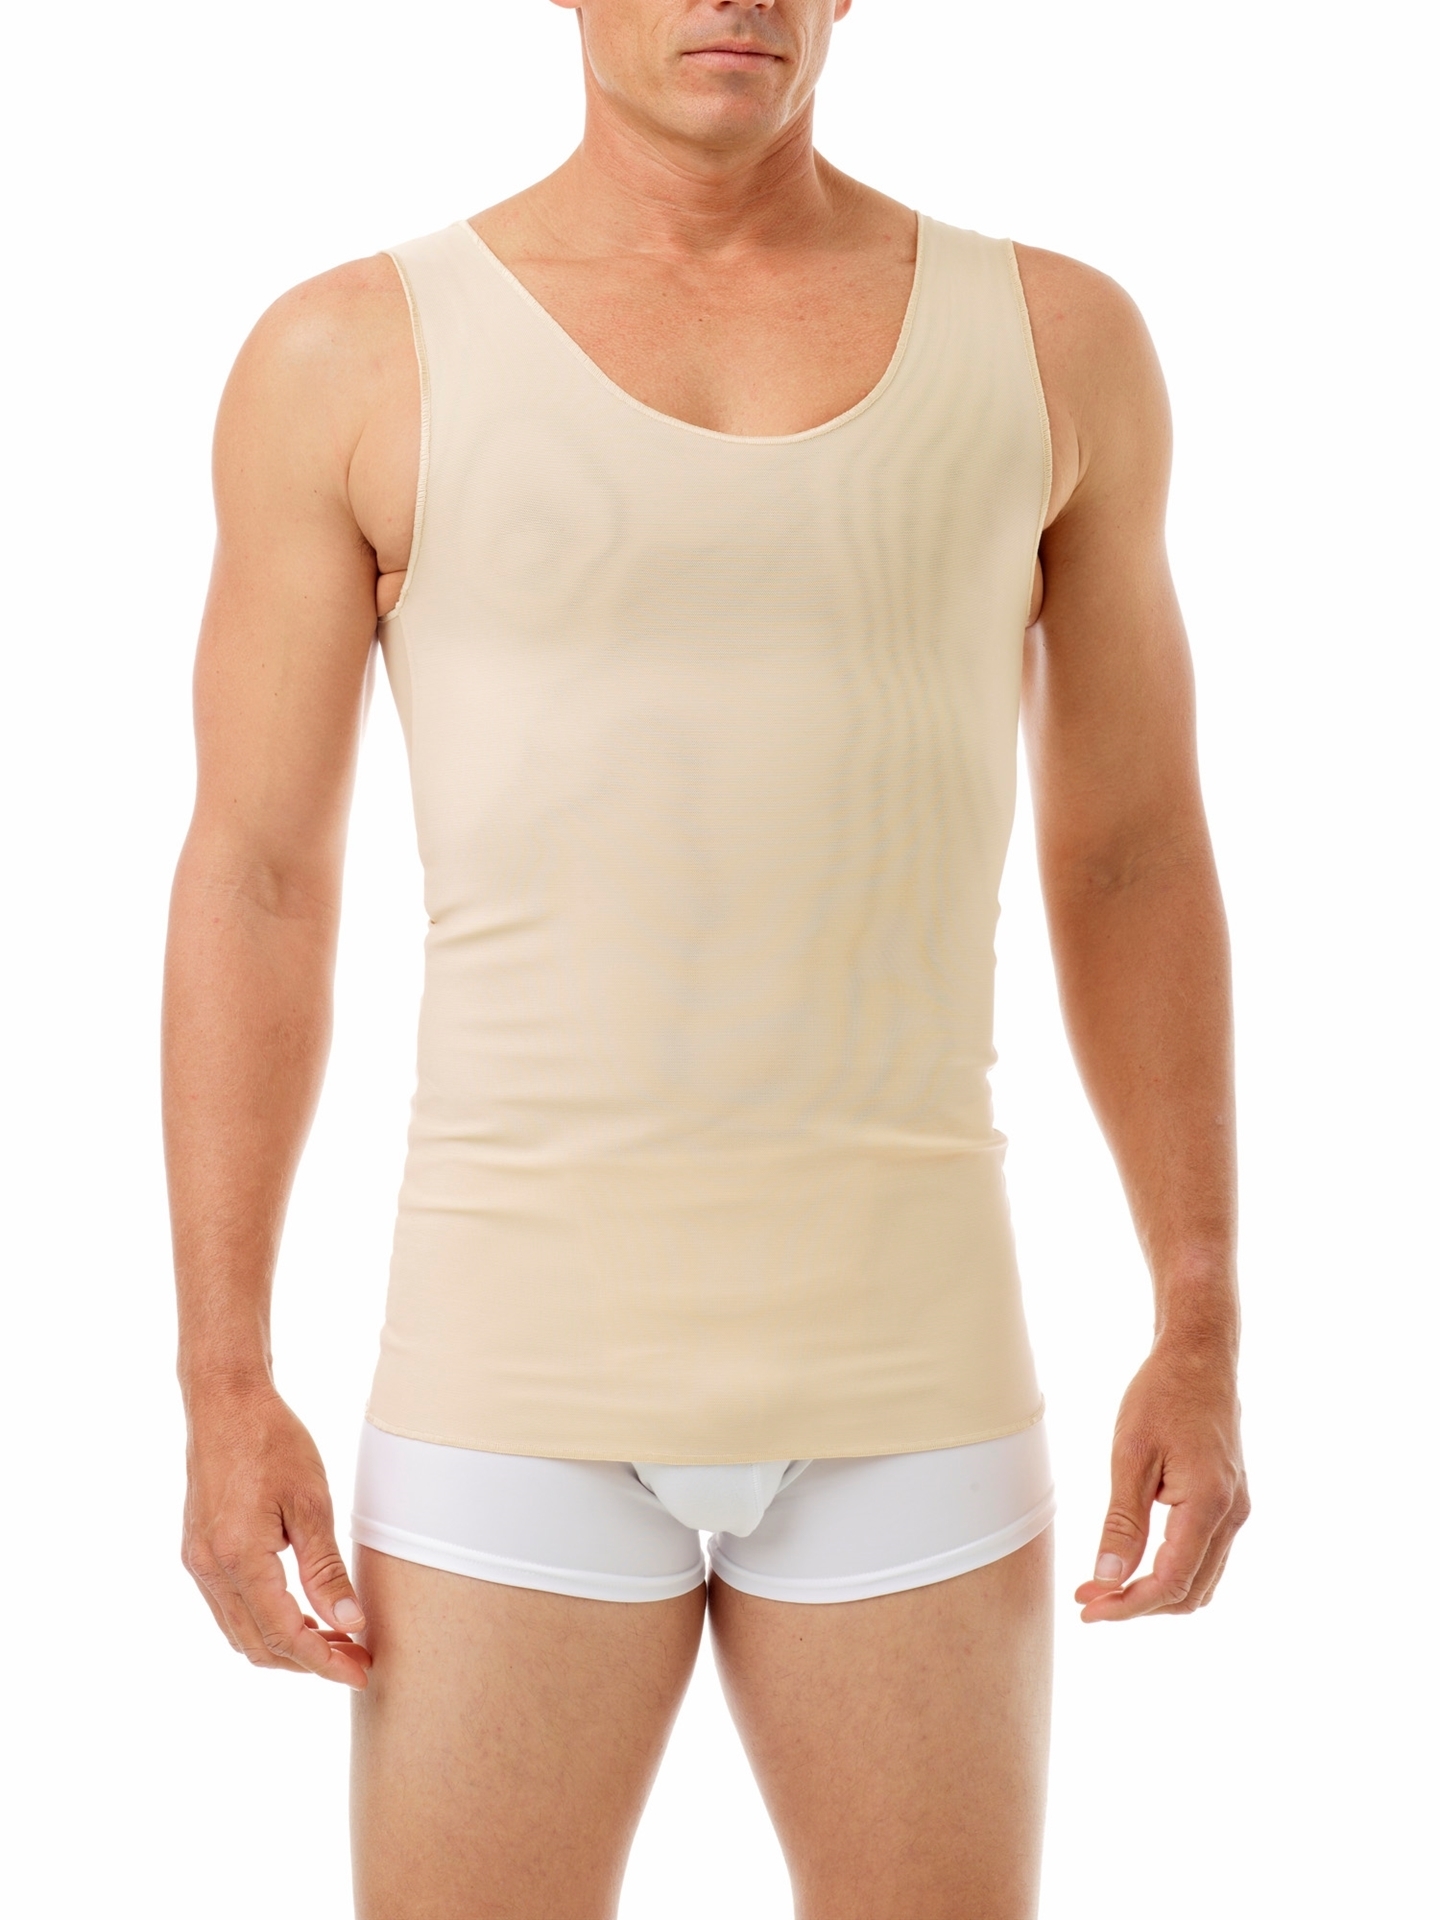 Underworks Mens Disposable Boxers 6-Pack - White - S